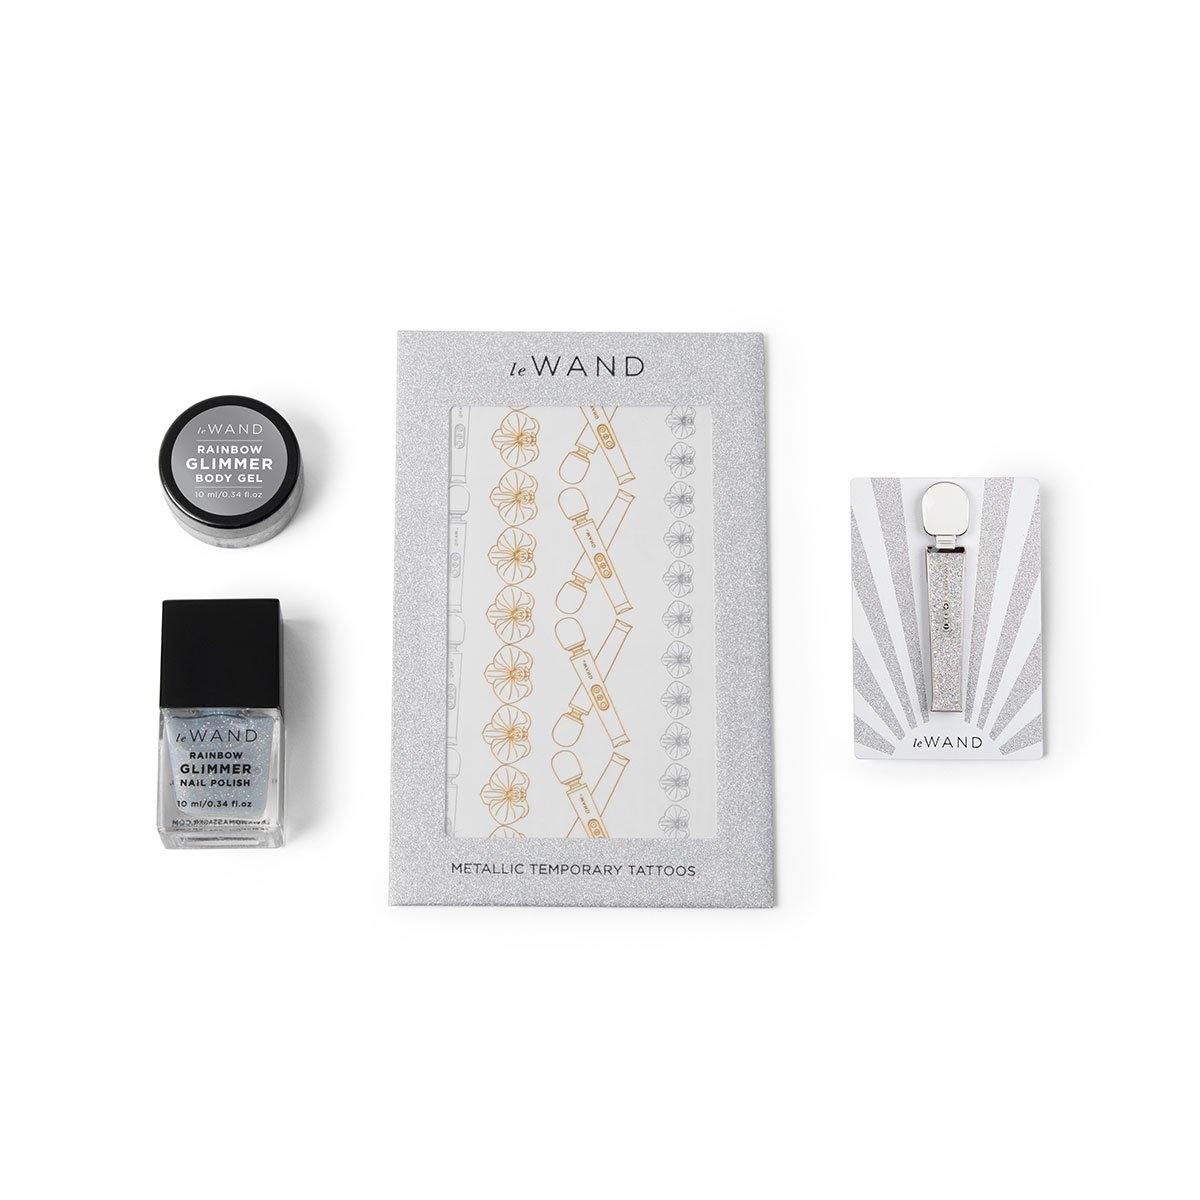 Le Wand - All that Glimmers White - Buy At Luxury Toy X - Free 3-Day Shipping